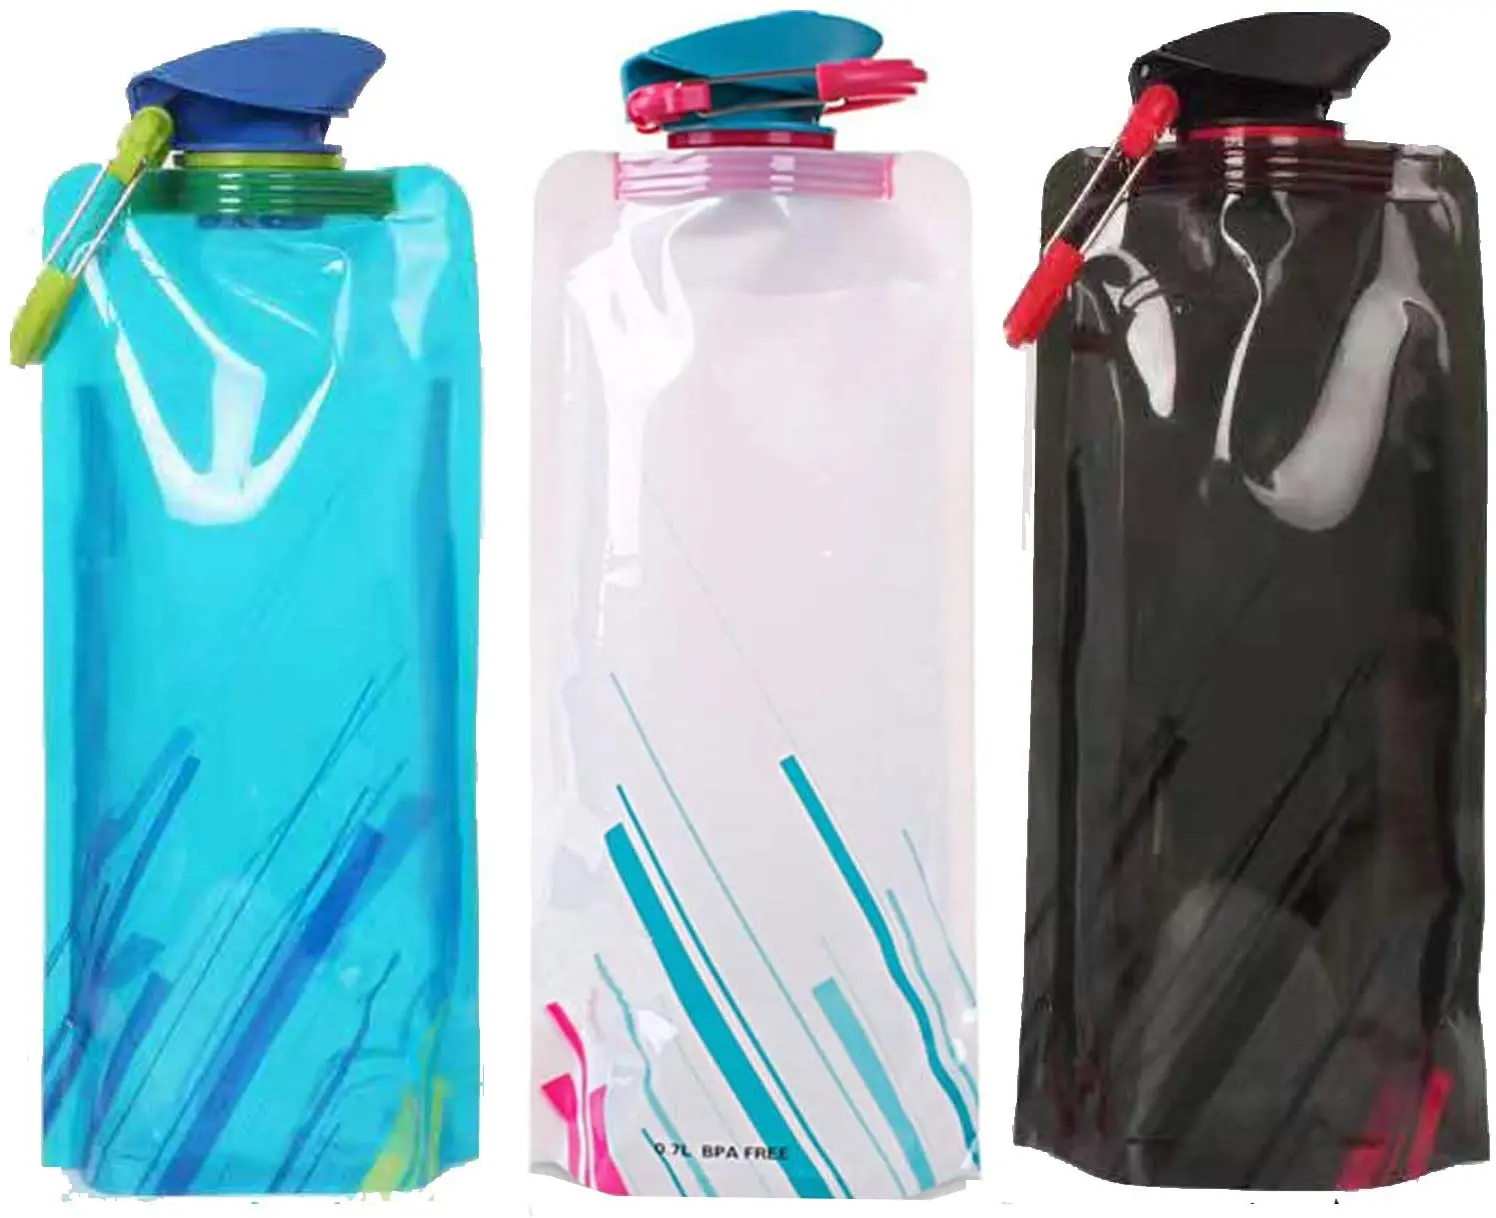 

700ML Outdoor Sports Collapsible Bottle Reusable Leakproof Folding Drinking Water Bottle Portable for Camping Water Bottles